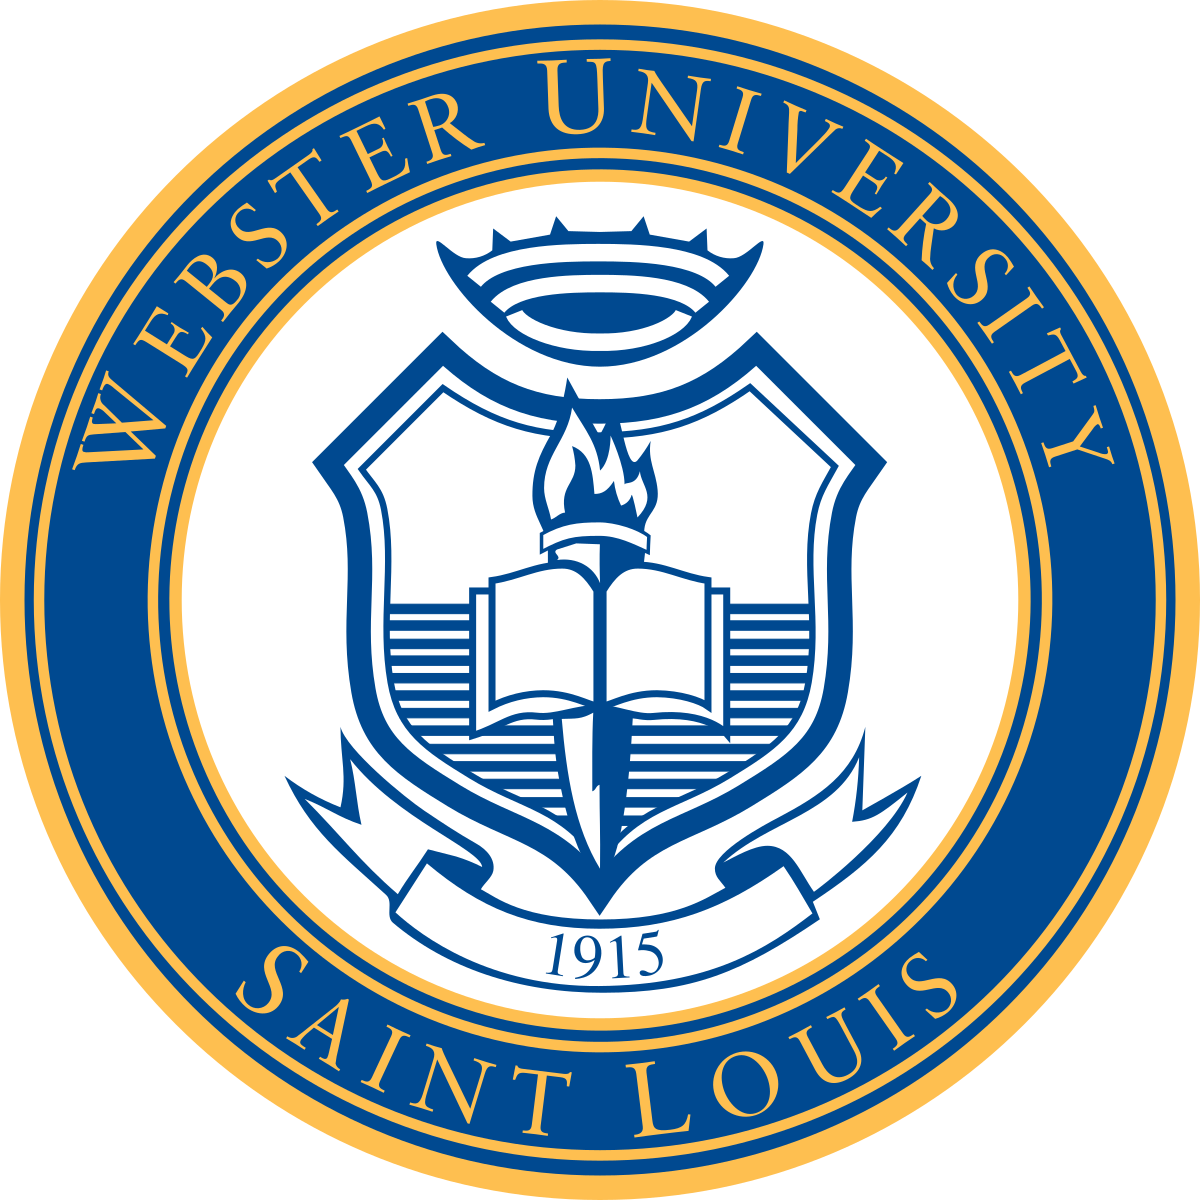 Webster University College Admission Requirements 2022/2023